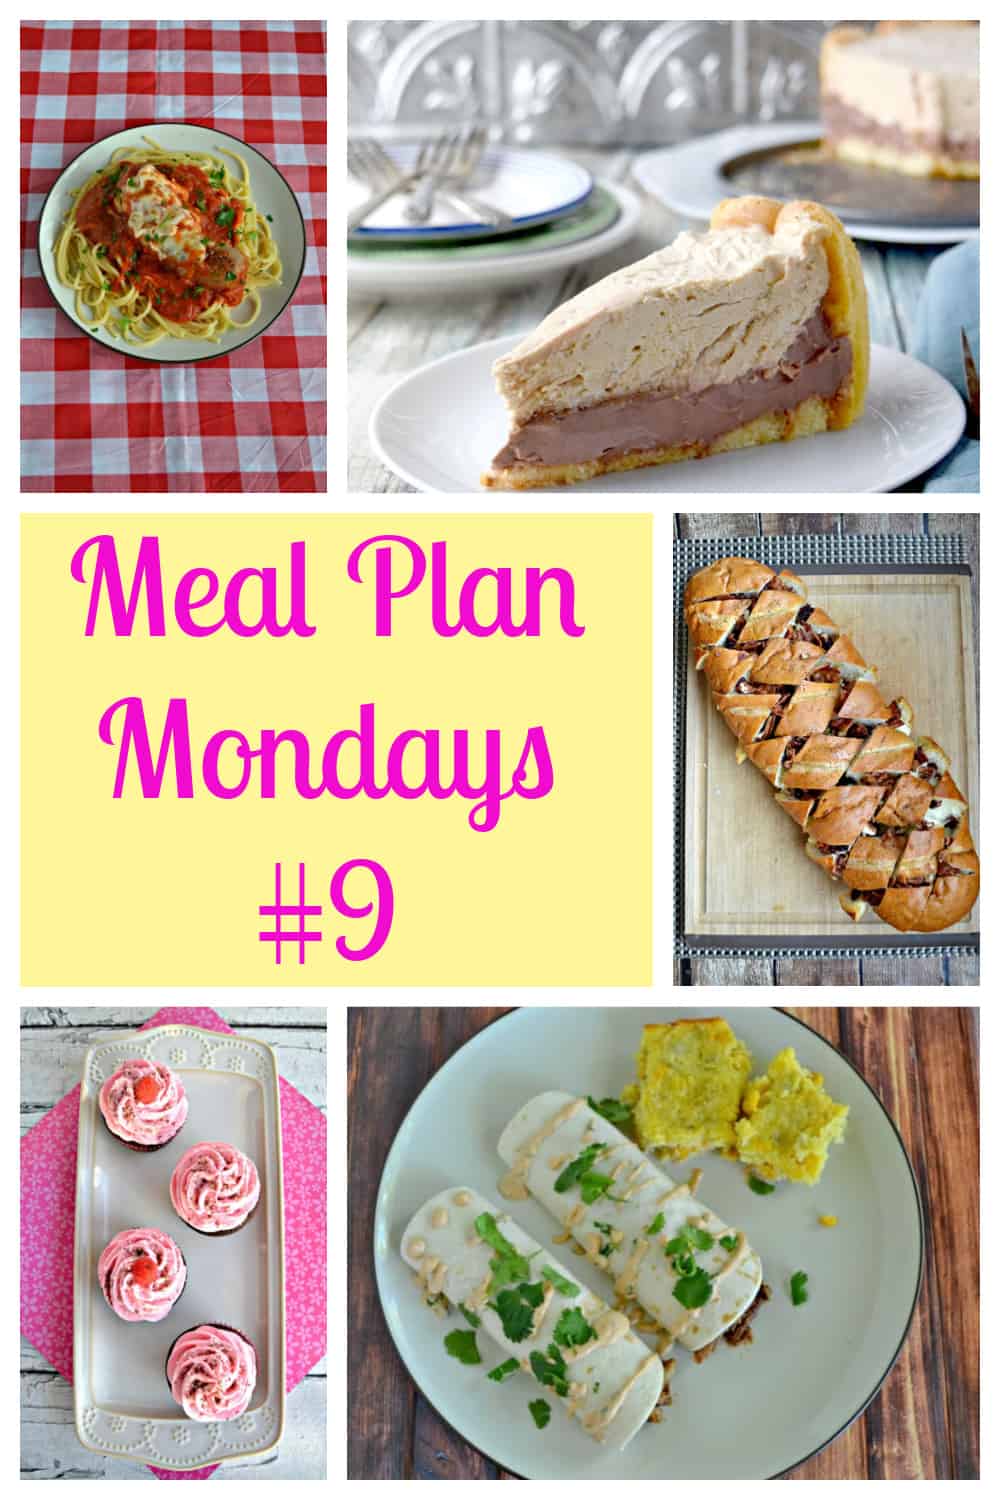 Meal Plan Mondays #9:  Easy Recipes for Weeknight Meals